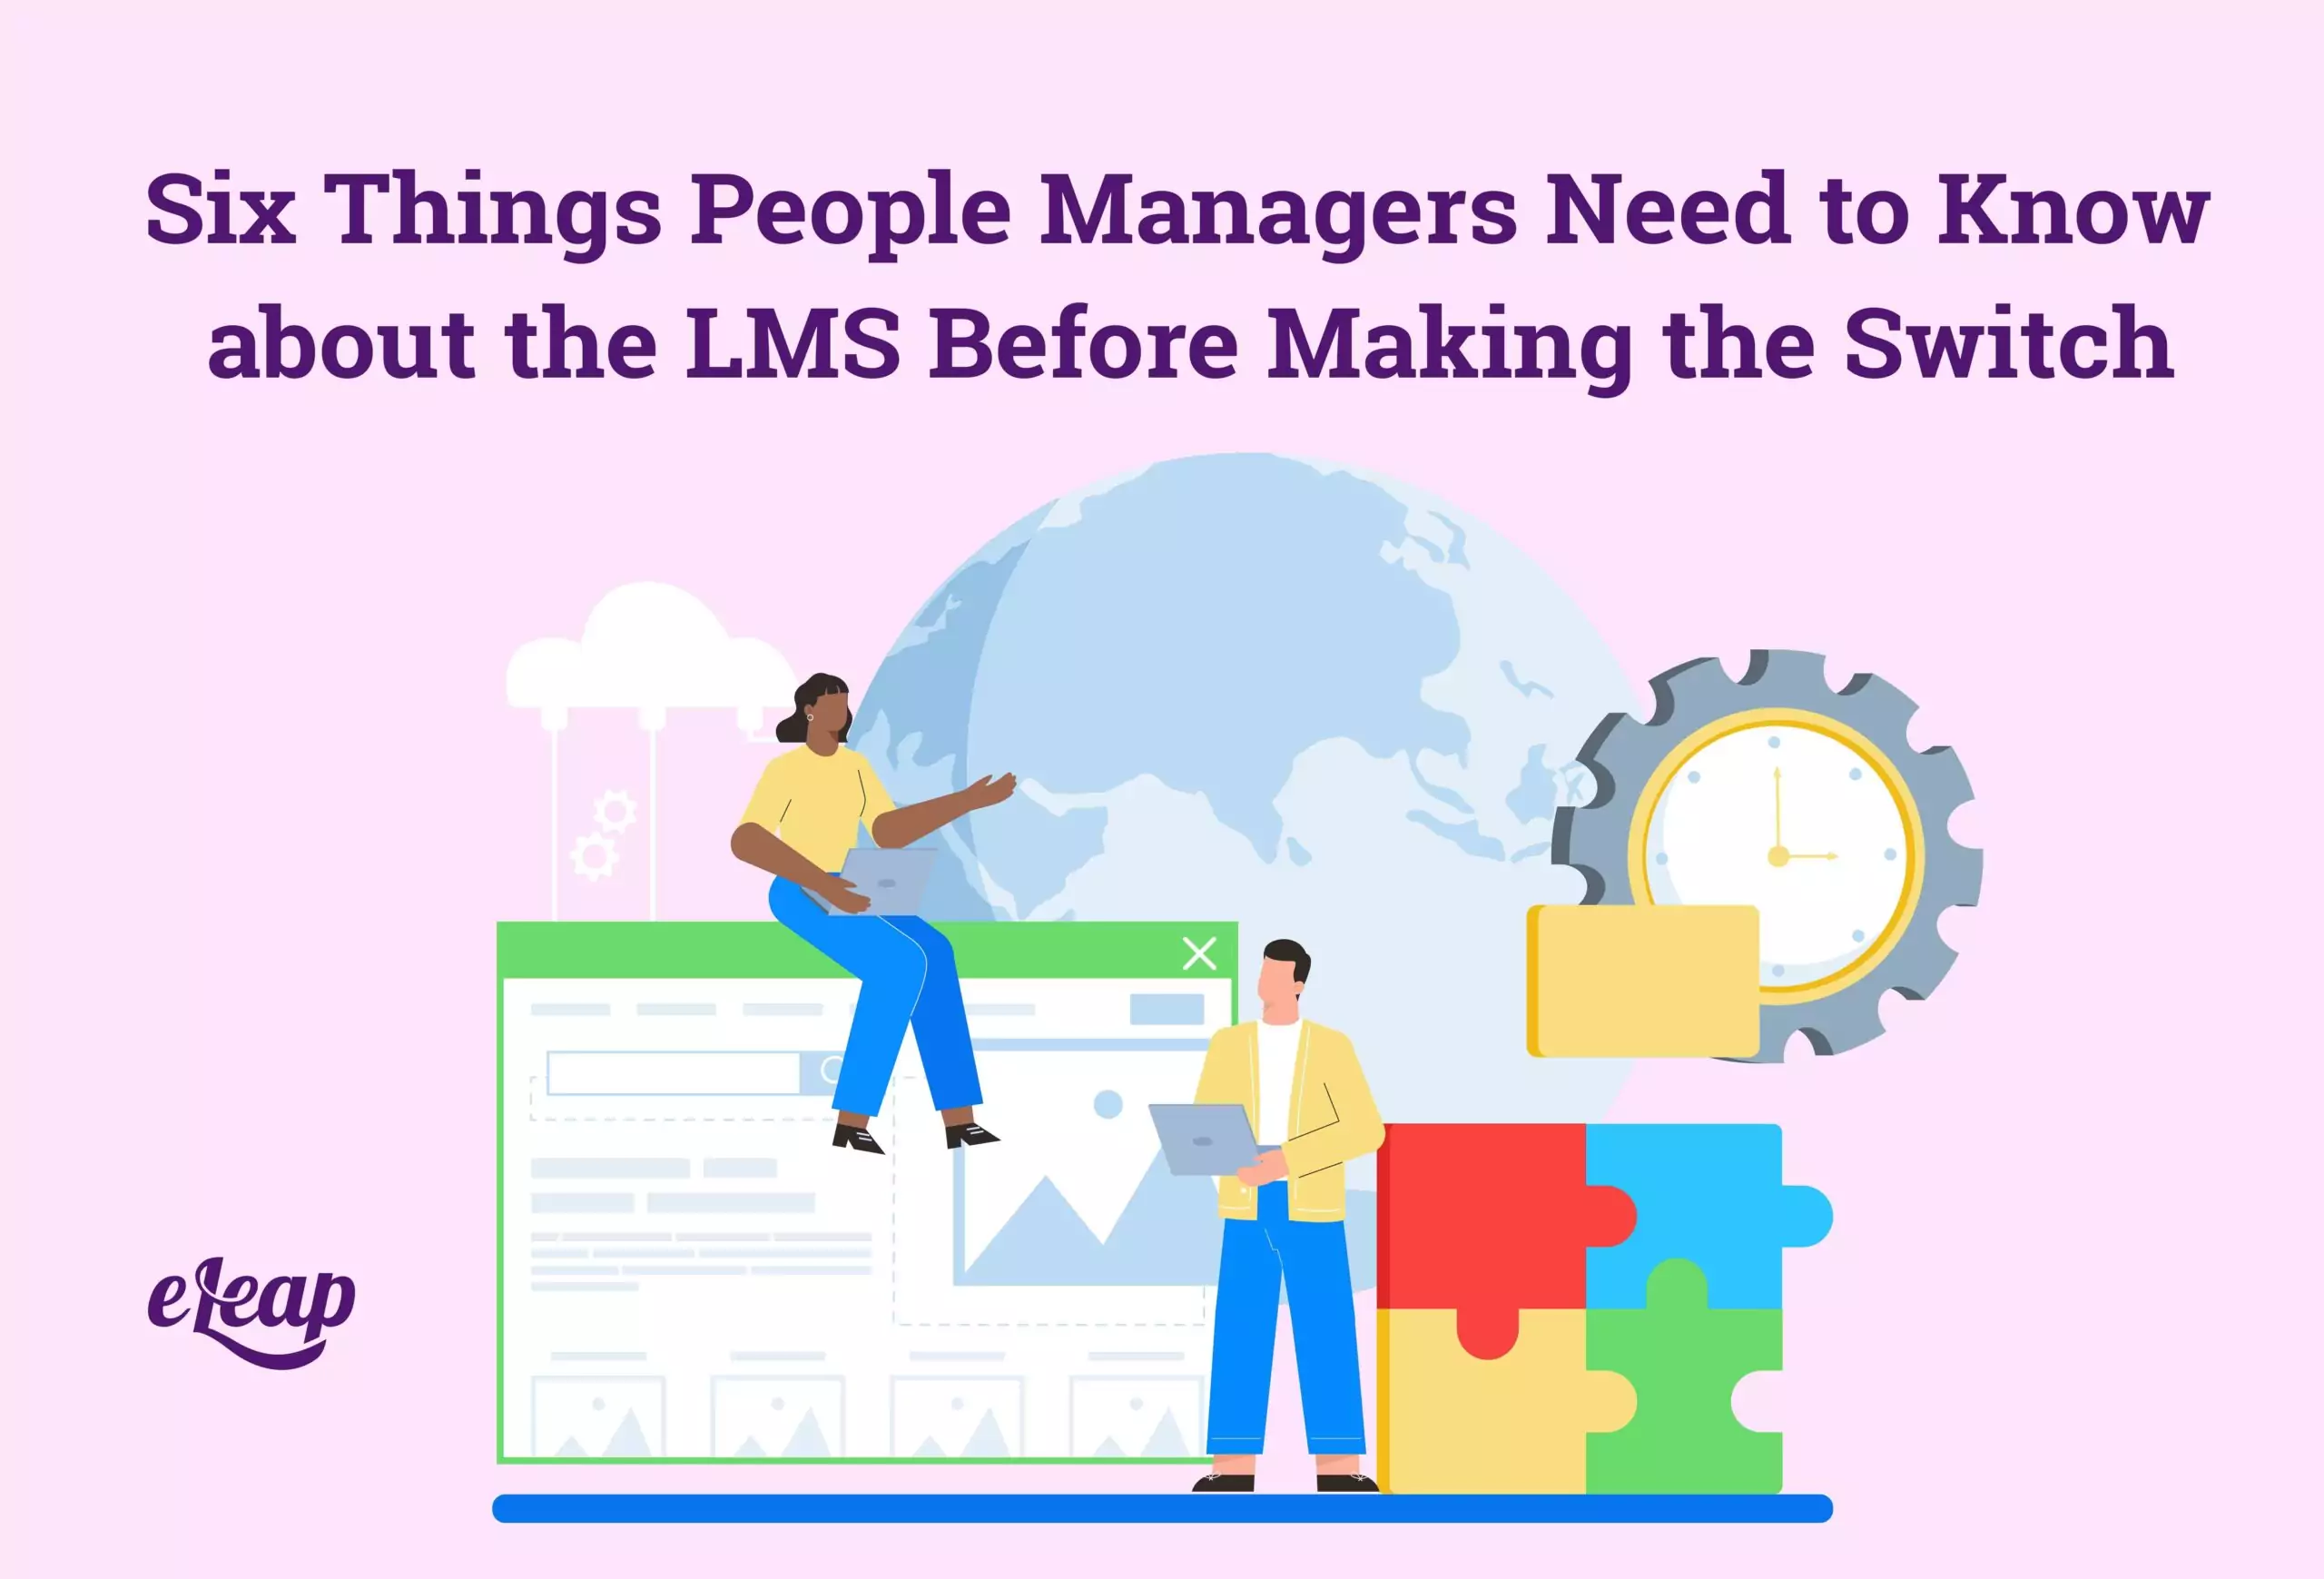 Six Things People Managers Need to Know about the LMS Before Making the Switch